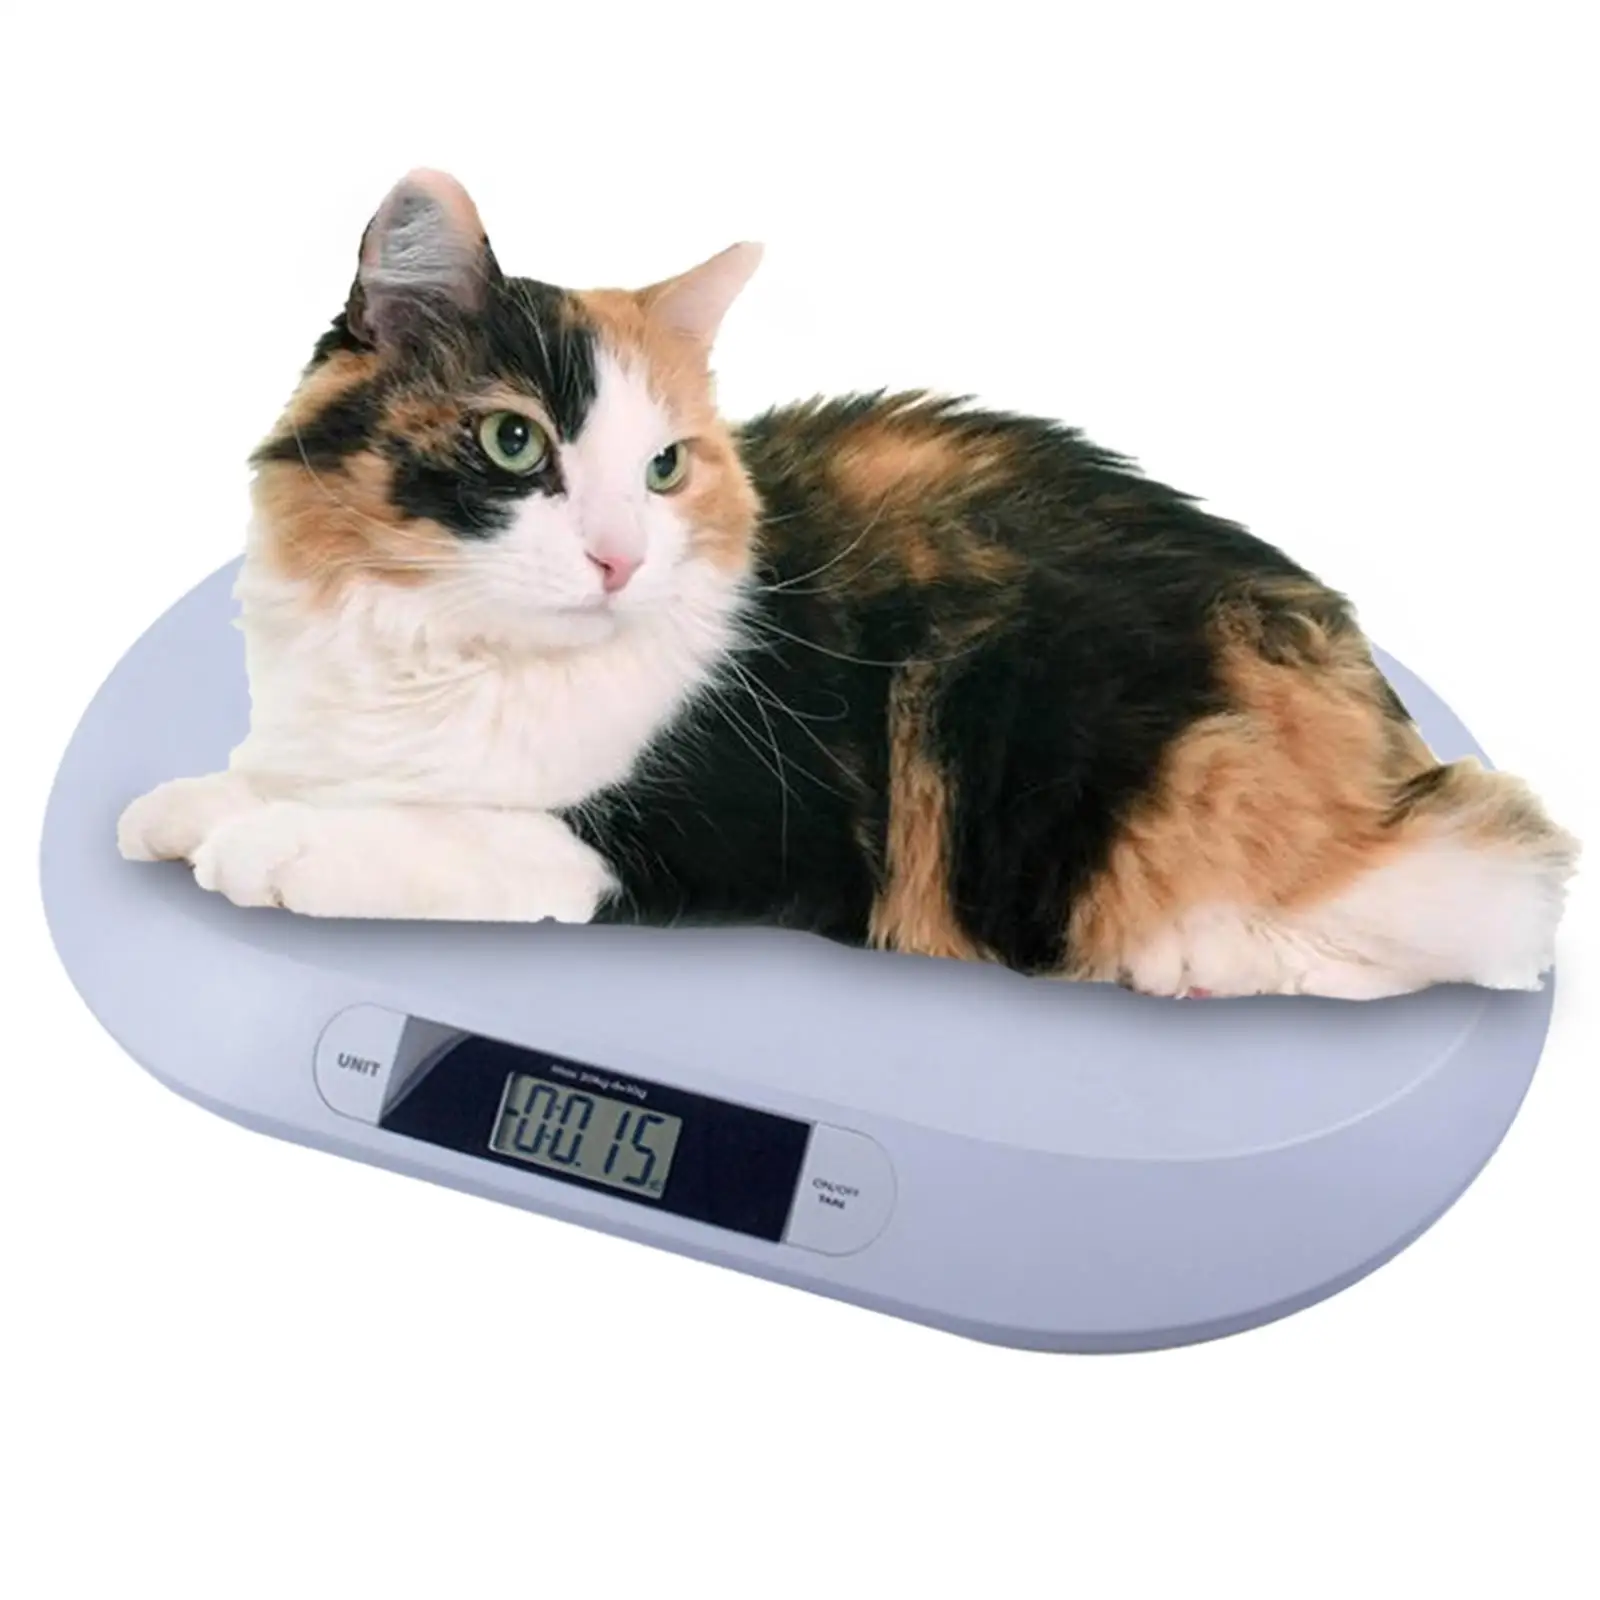 Infant Scale Multifunction 44.1lb Capacity for Toddlers Newborns Puppy